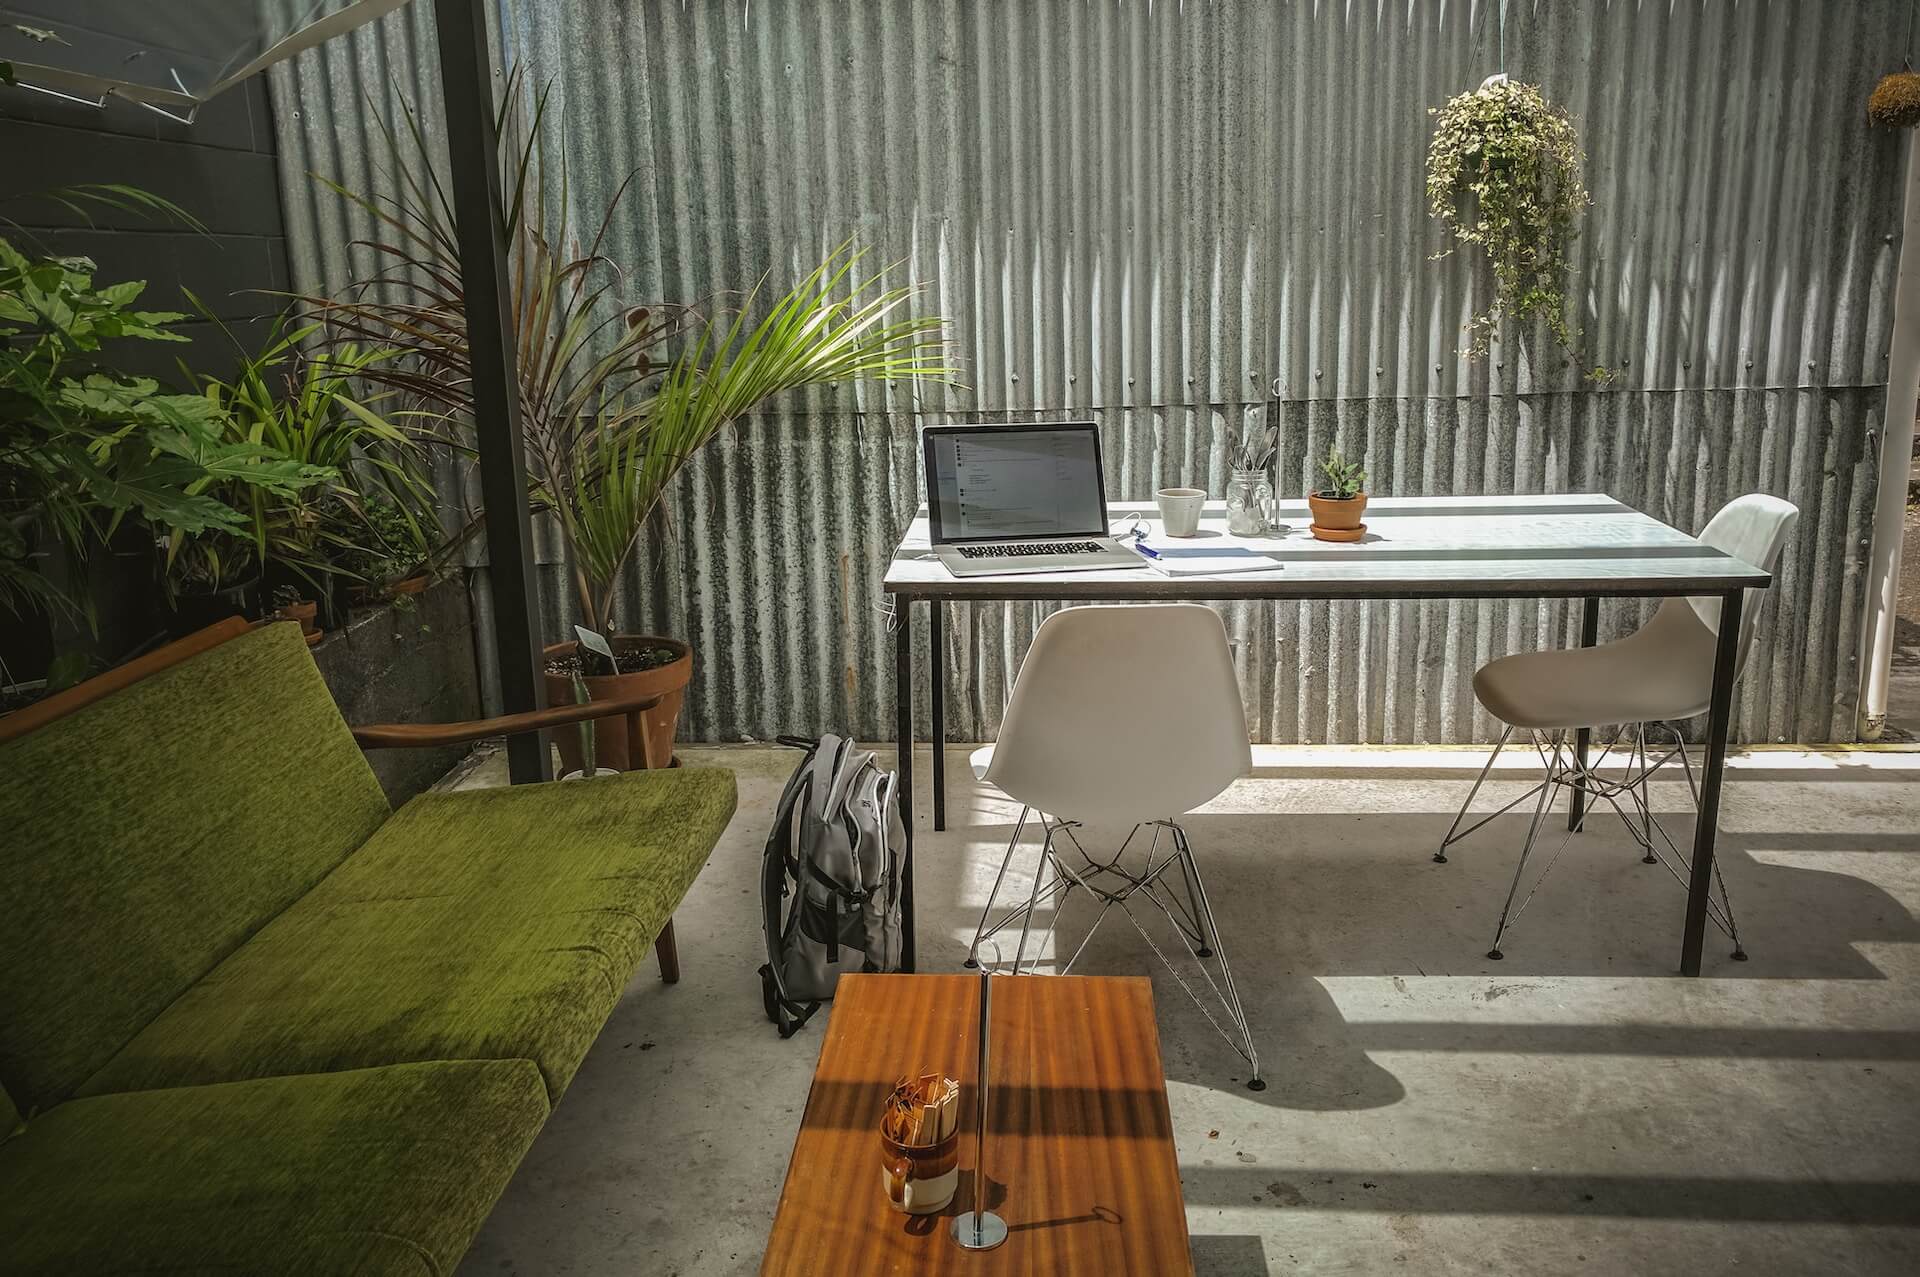 Outdoor office close to greenery